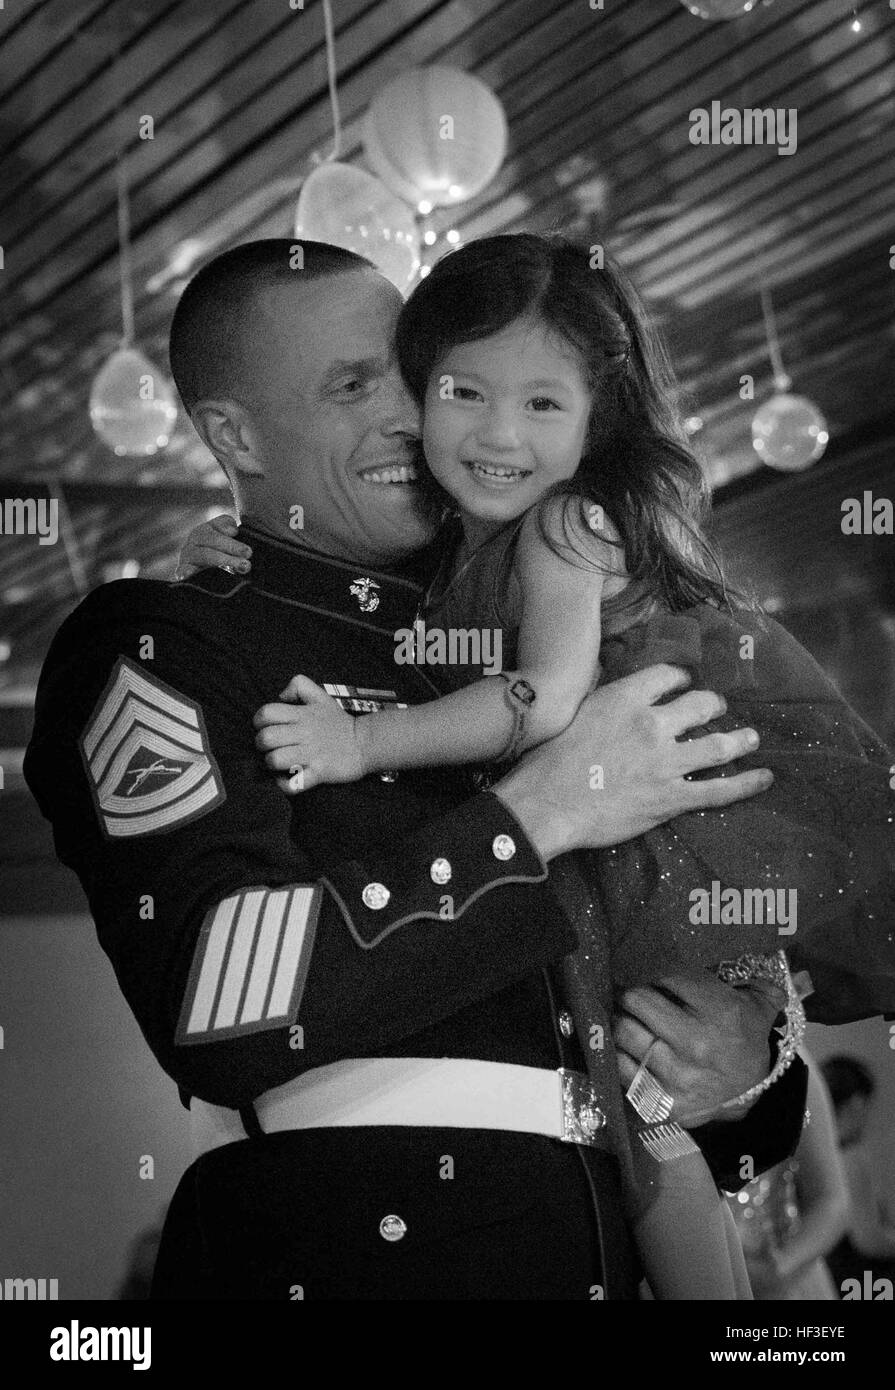 Gunnery Sgt. Dustin Peterson and his daughter dance during the Father Daughter Dance   hosted by 1st Battalion, 3rd Marine Regiment and the Armed Services YMCA, at the Officer's Club, June 27, 2015. The event stressed the importance of a father-daughter relationship and gave them an opportunity to spend quality time together. (U.S. Marine Corps photo by Cpl. Brittney Vito/Released) Daddies, Daughters Dance Night Away 150627-M-TM809-931 Stock Photo